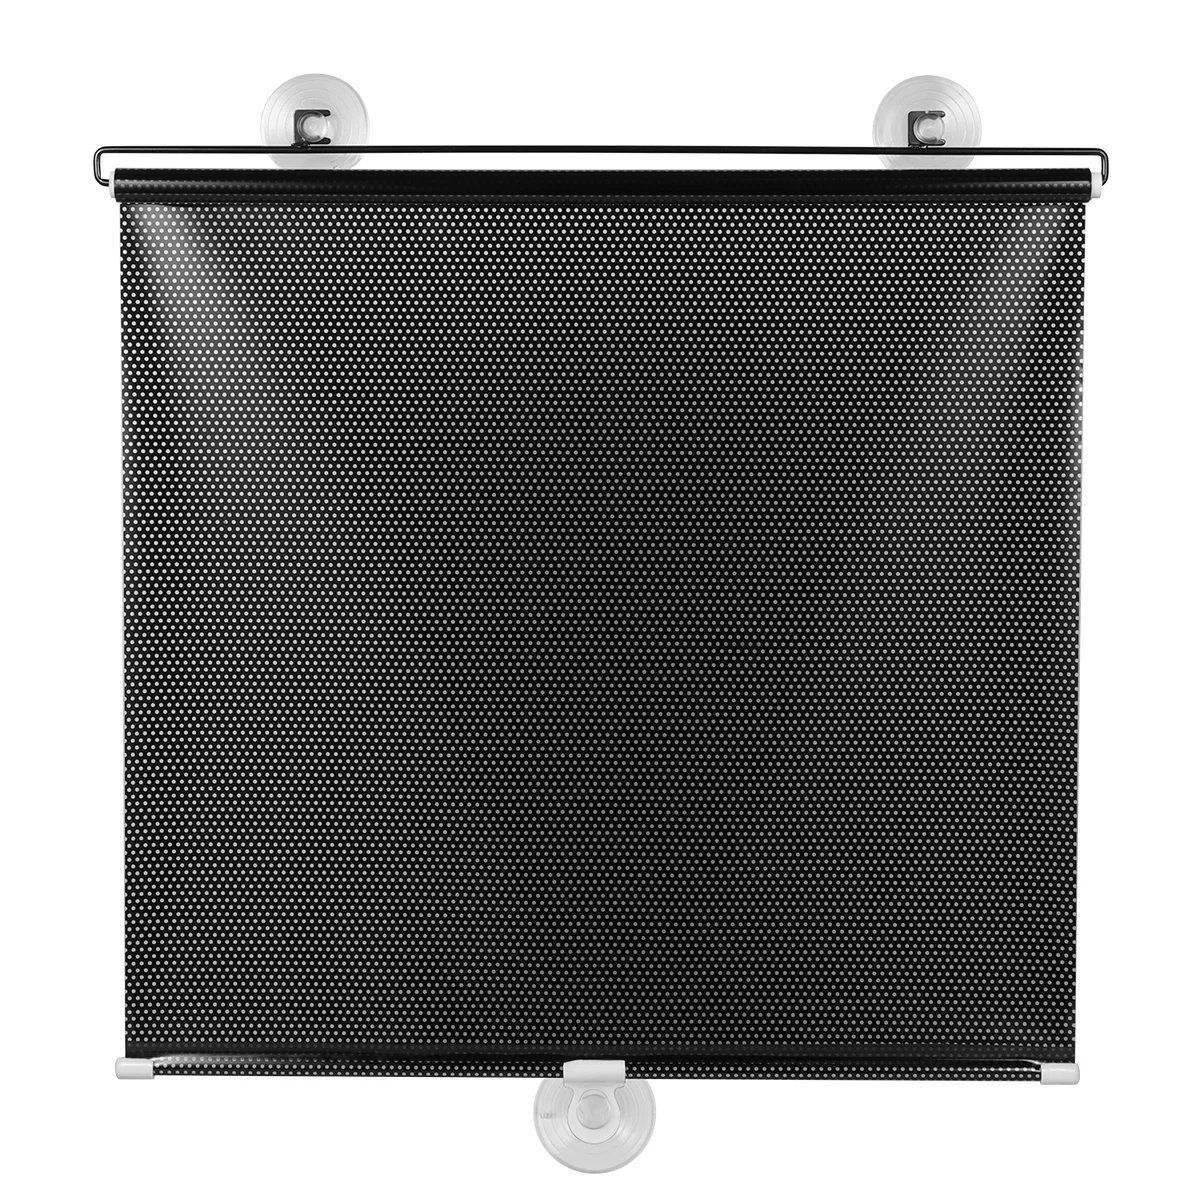 

Car office telescopic curtain Window Shade Balcony Suction Cup Sunshade Blackout Curtains Blinds Roller Shades Window Cover